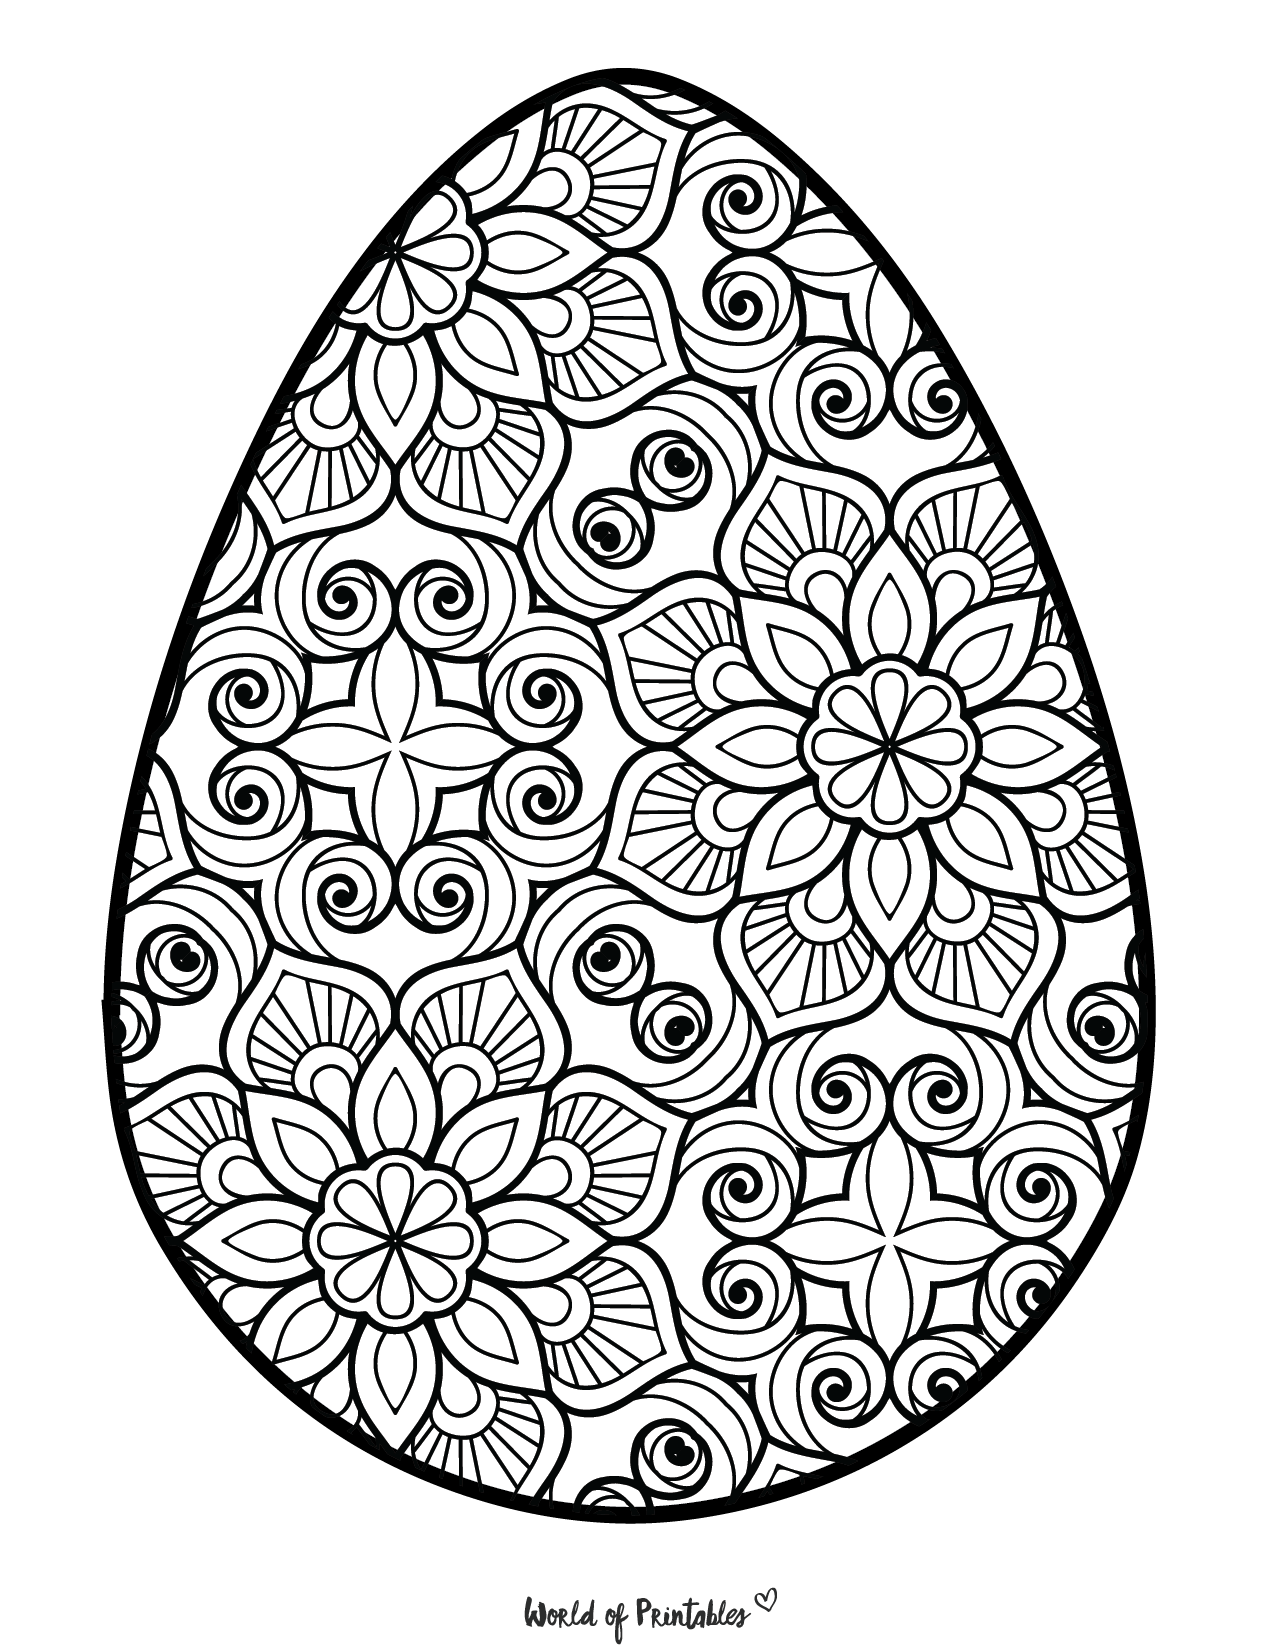 Easter Coloring Pages   20 Fun Easter Printables   World of Printables